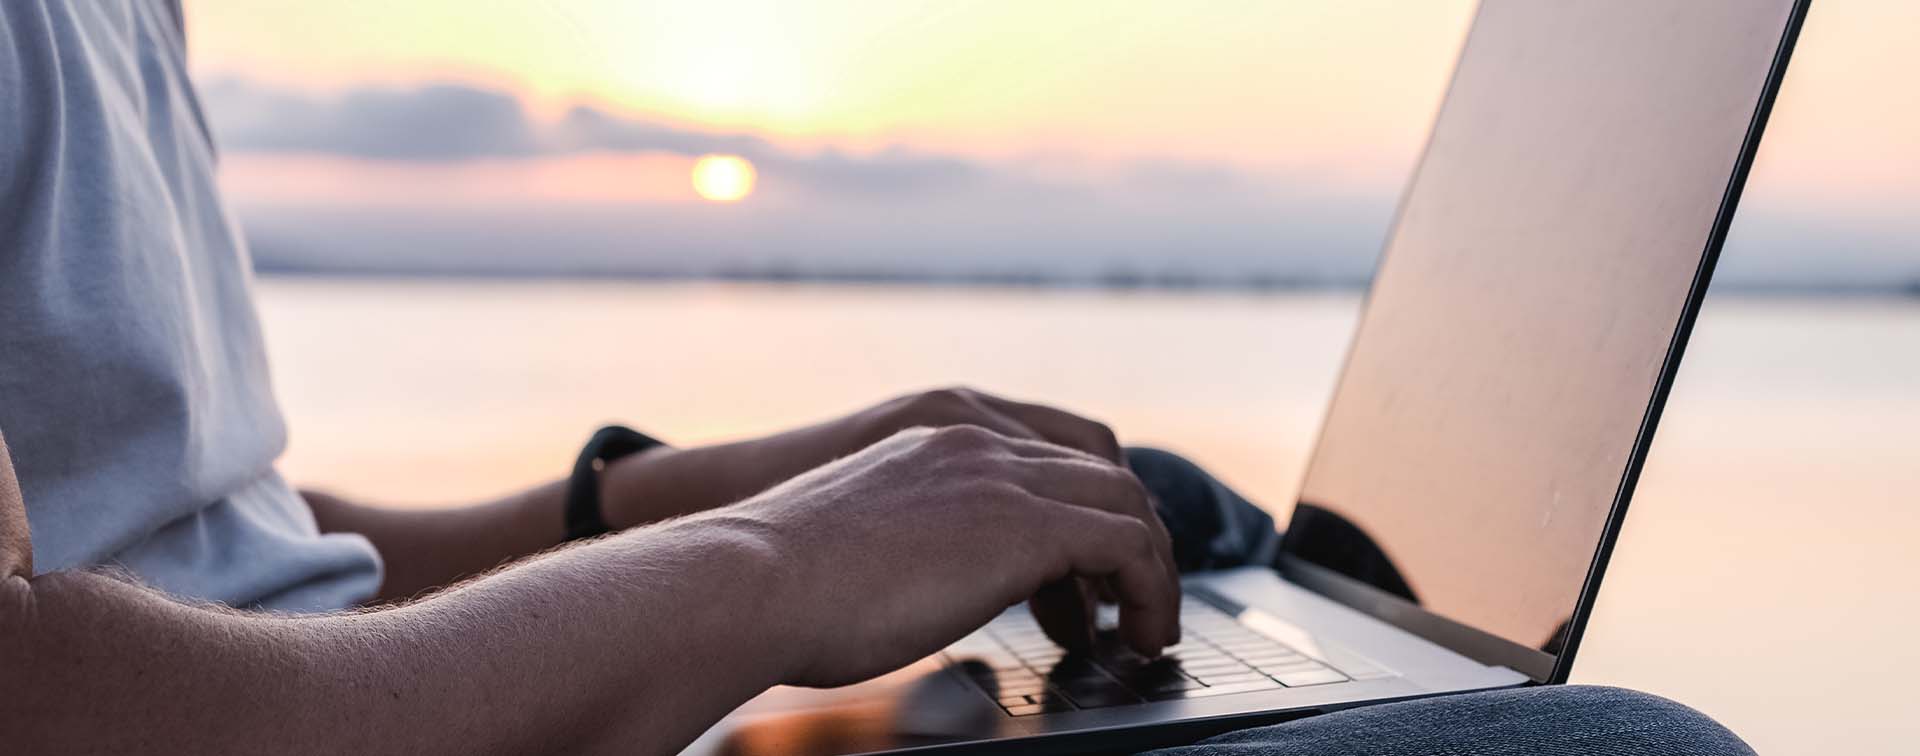 Man working on laptop in front of ocean view